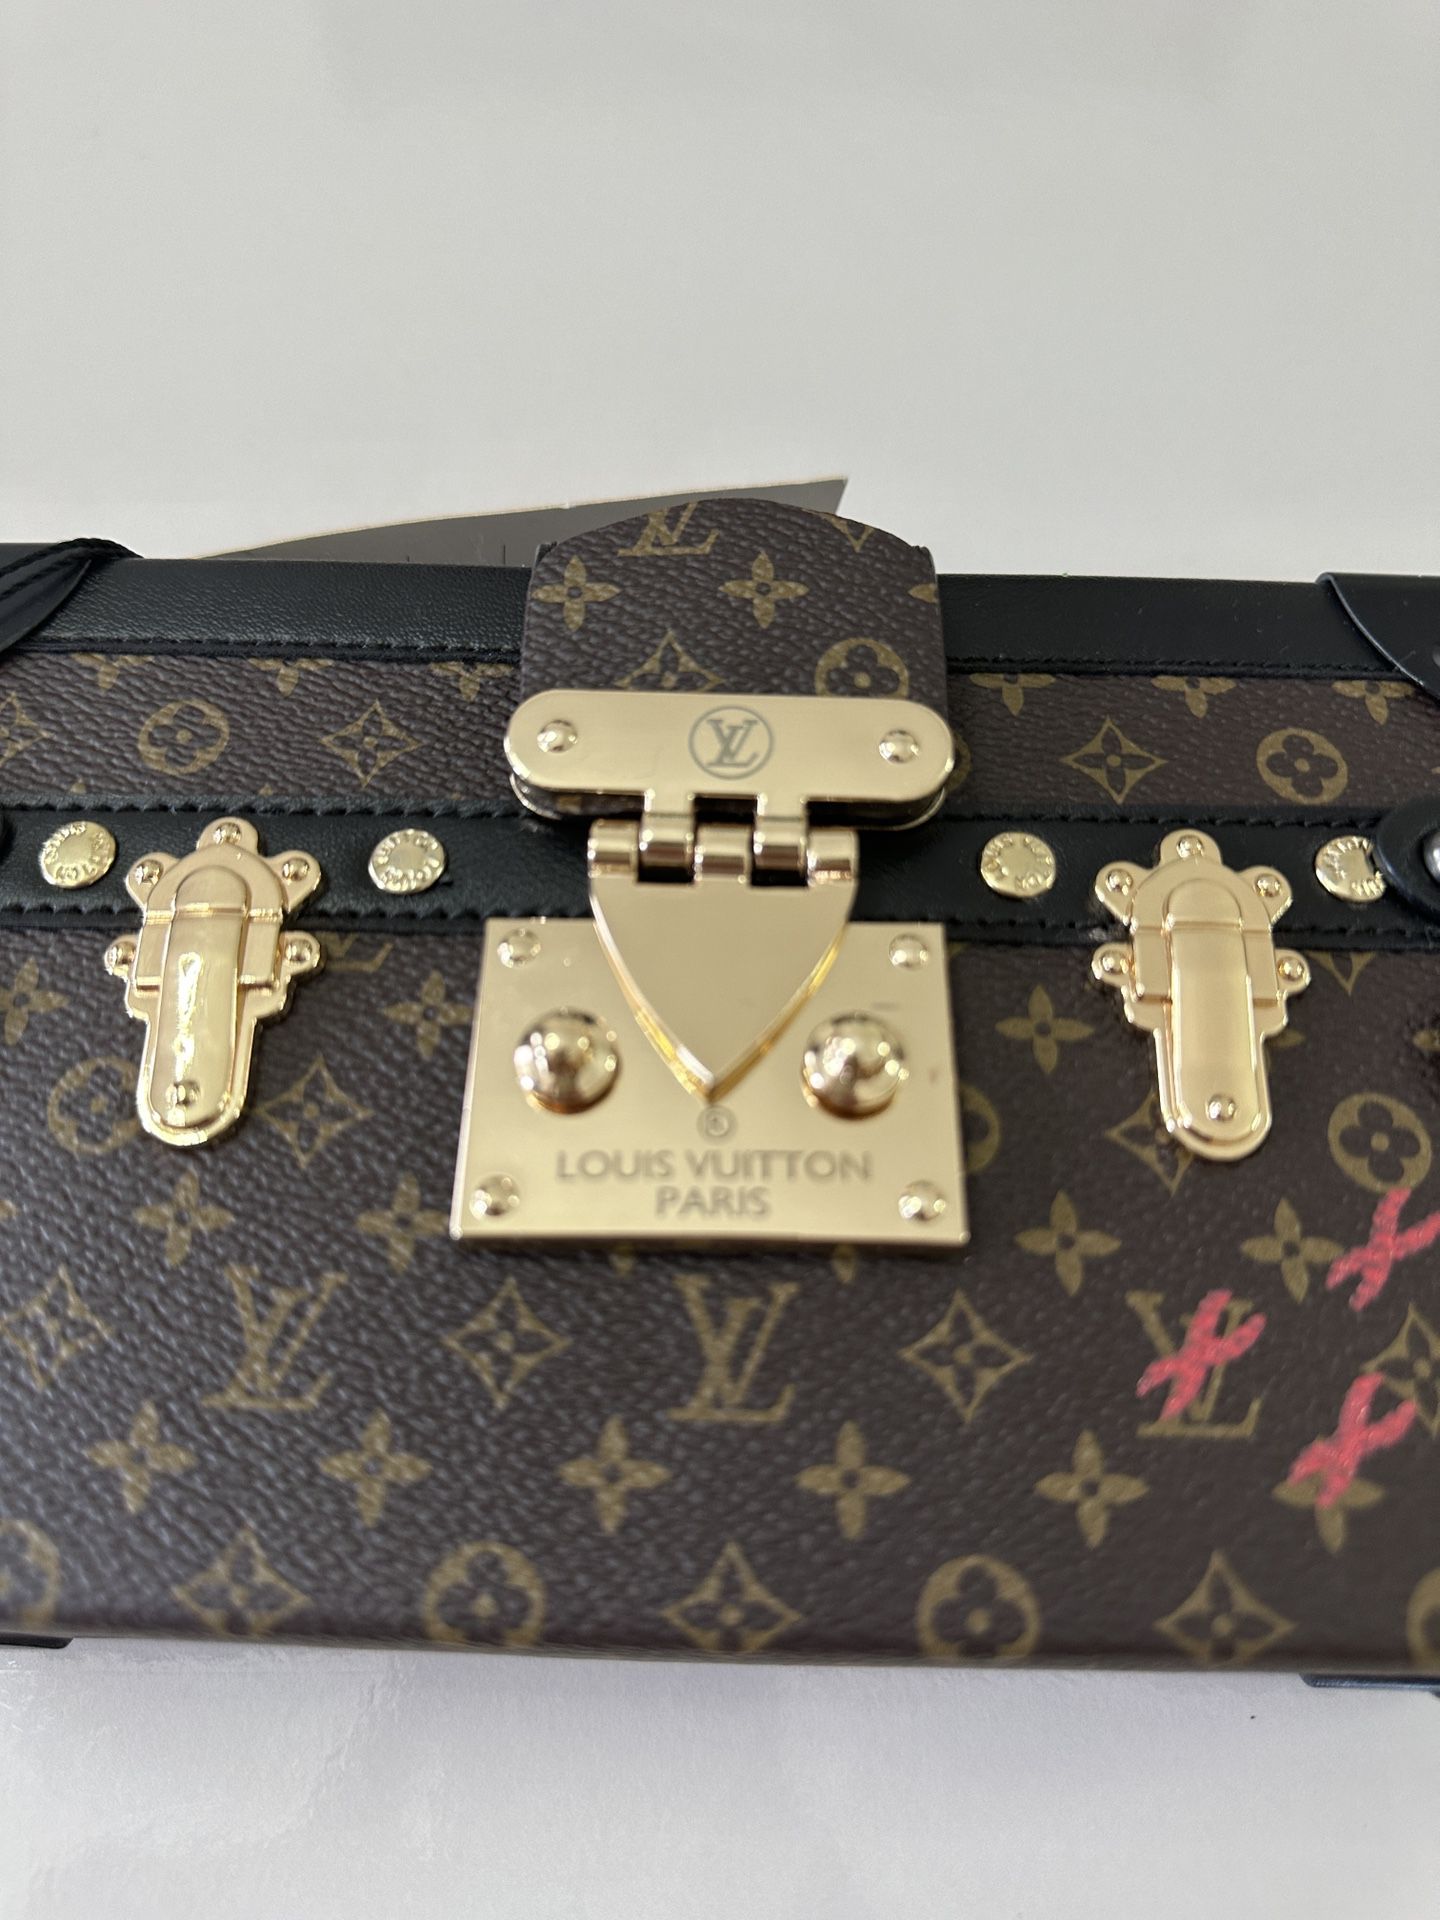 Authentic Louis Vuitton Preowned Monogram Studded Petite Malle With Dust Bag  for Sale in Mineola, NY - OfferUp